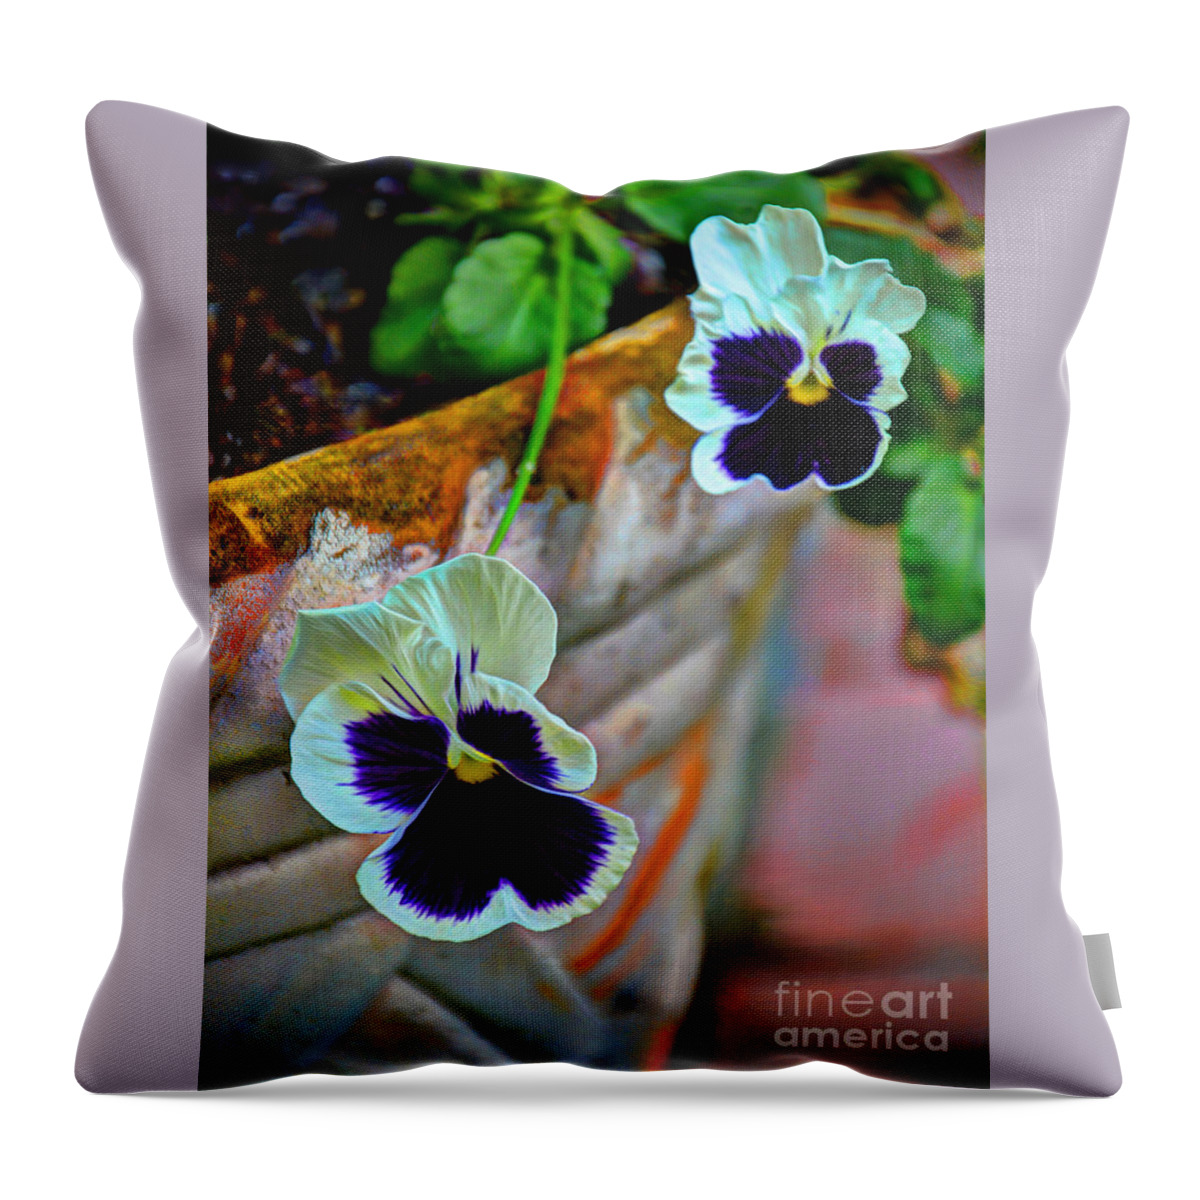 Pansies Throw Pillow featuring the photograph Pansies by Savannah Gibbs